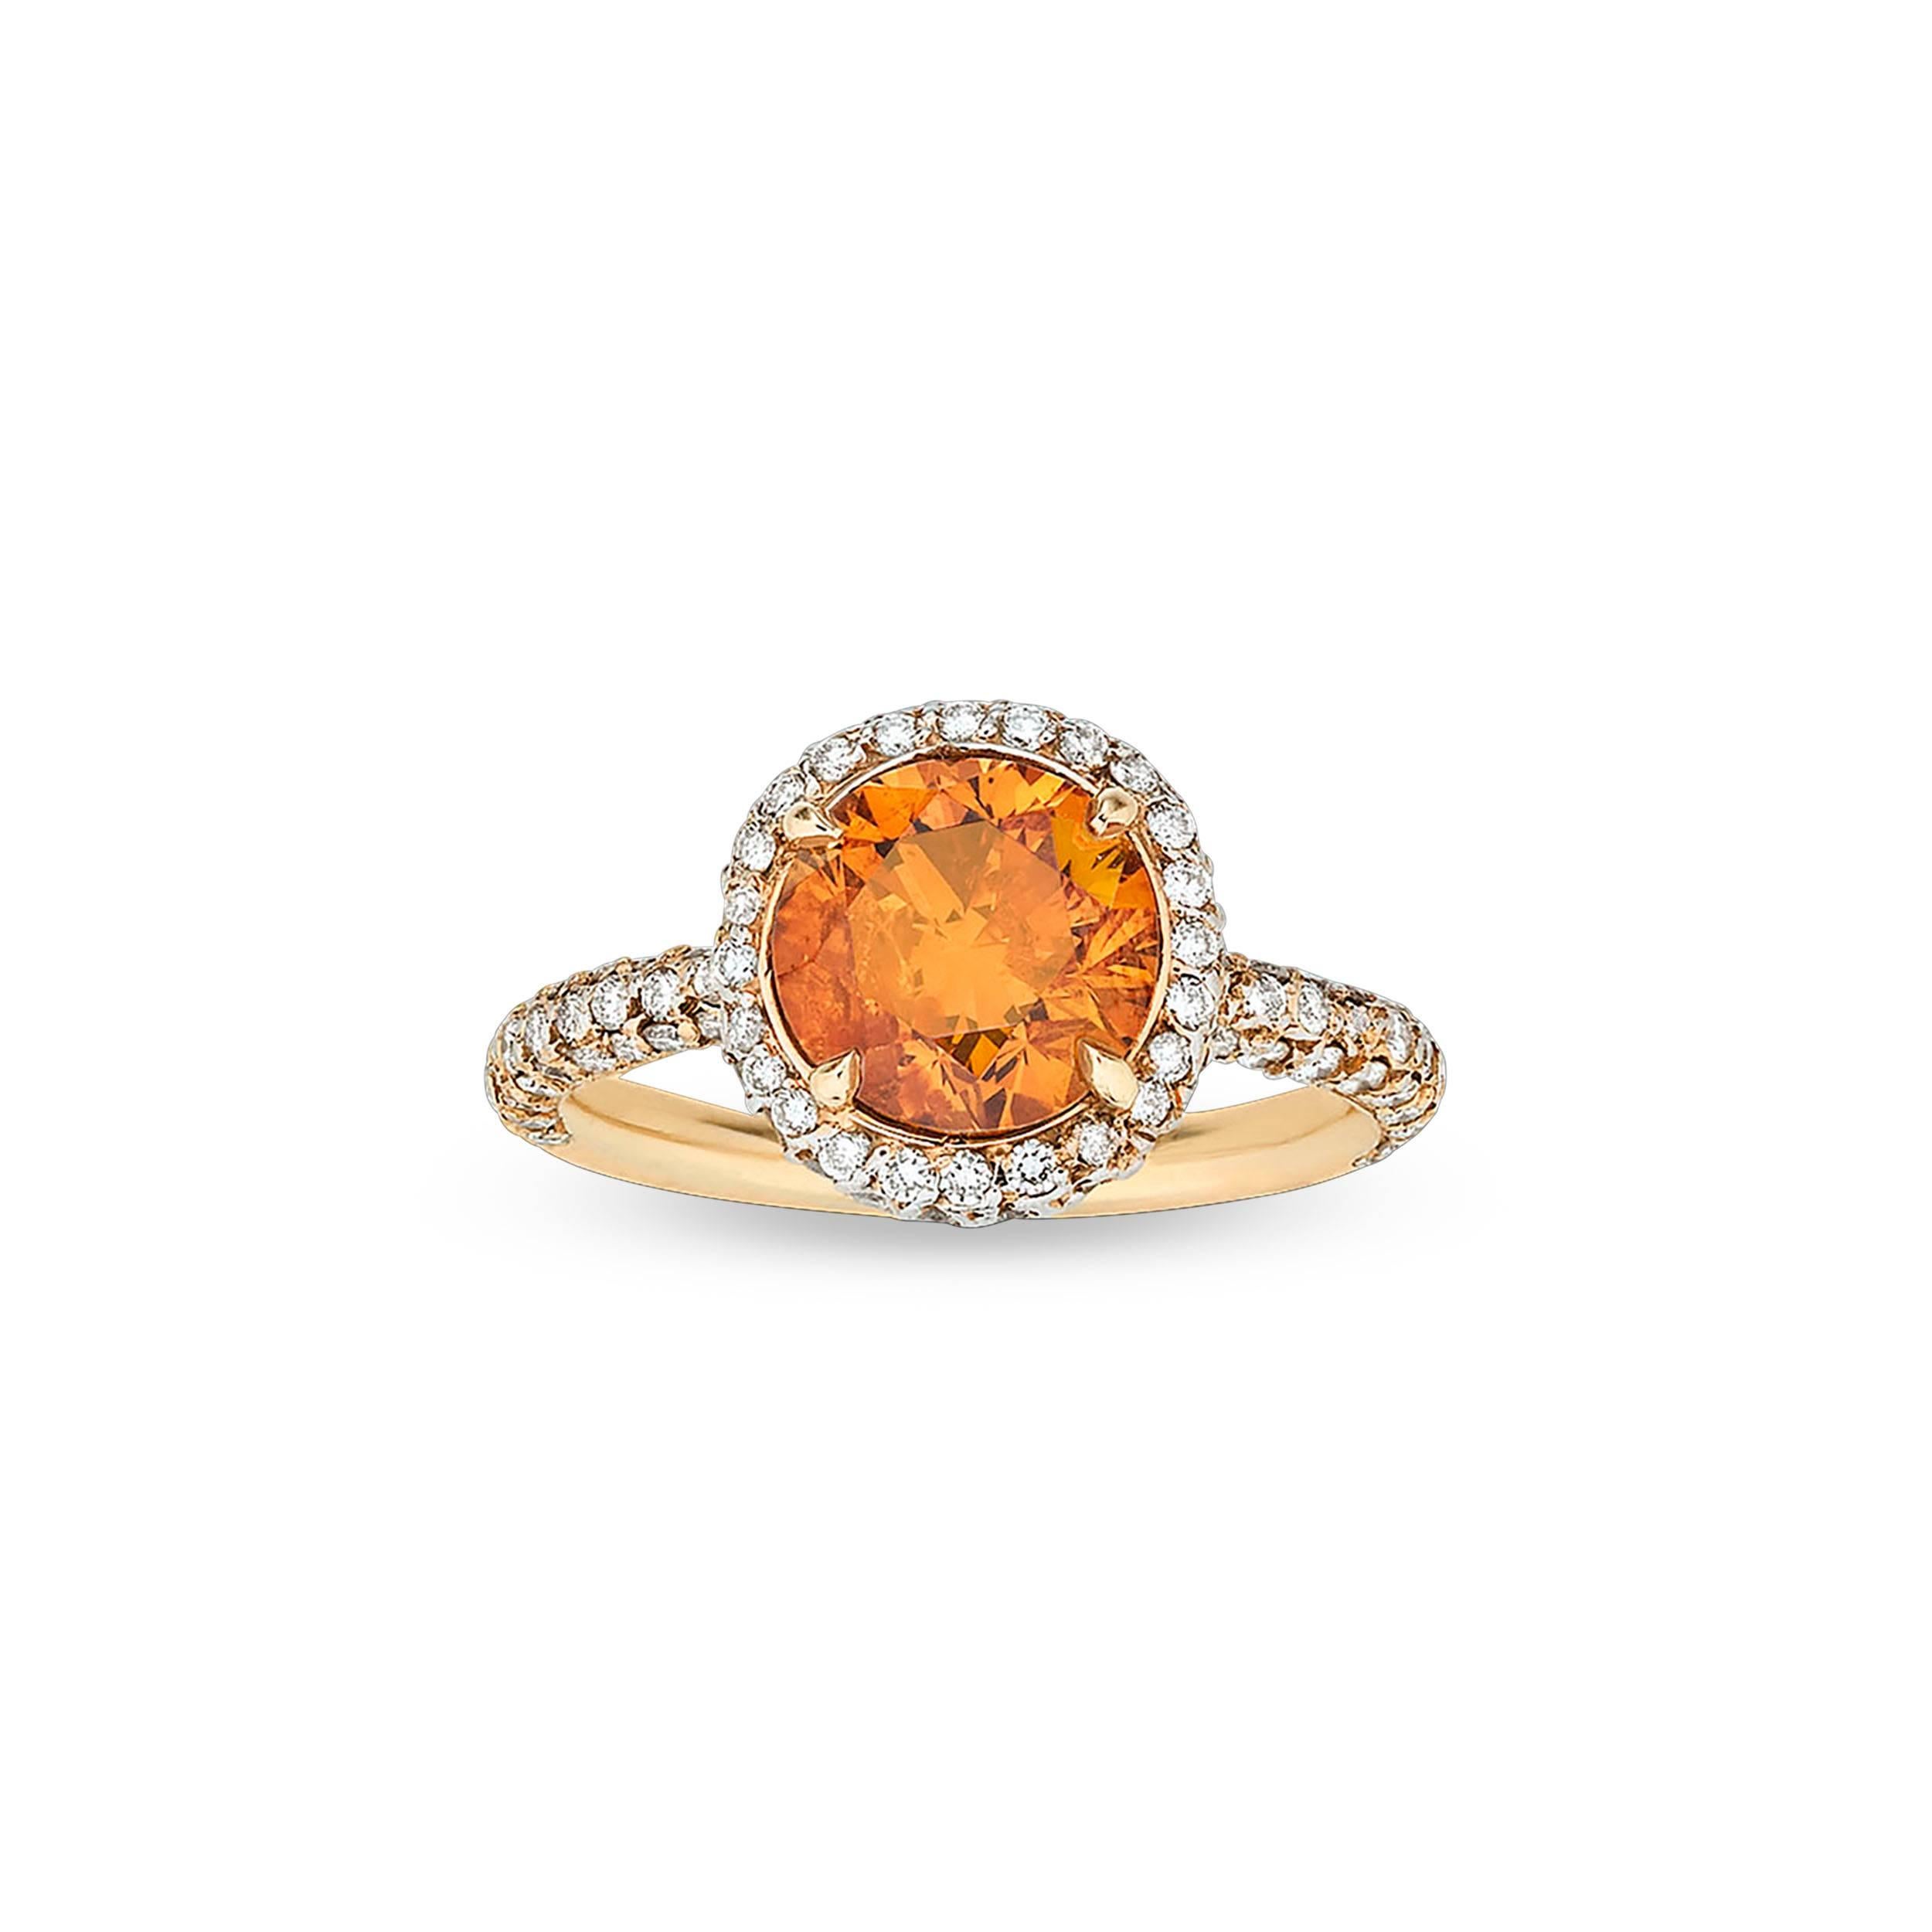 A rare 2.34-carat fancy deep yellowish-orange diamond displays a remarkable depth of color and brilliance in this extraordinary ring. Prized for both their beauty and rarity, yellowish-orange diamonds are among the most desirable and radiant of